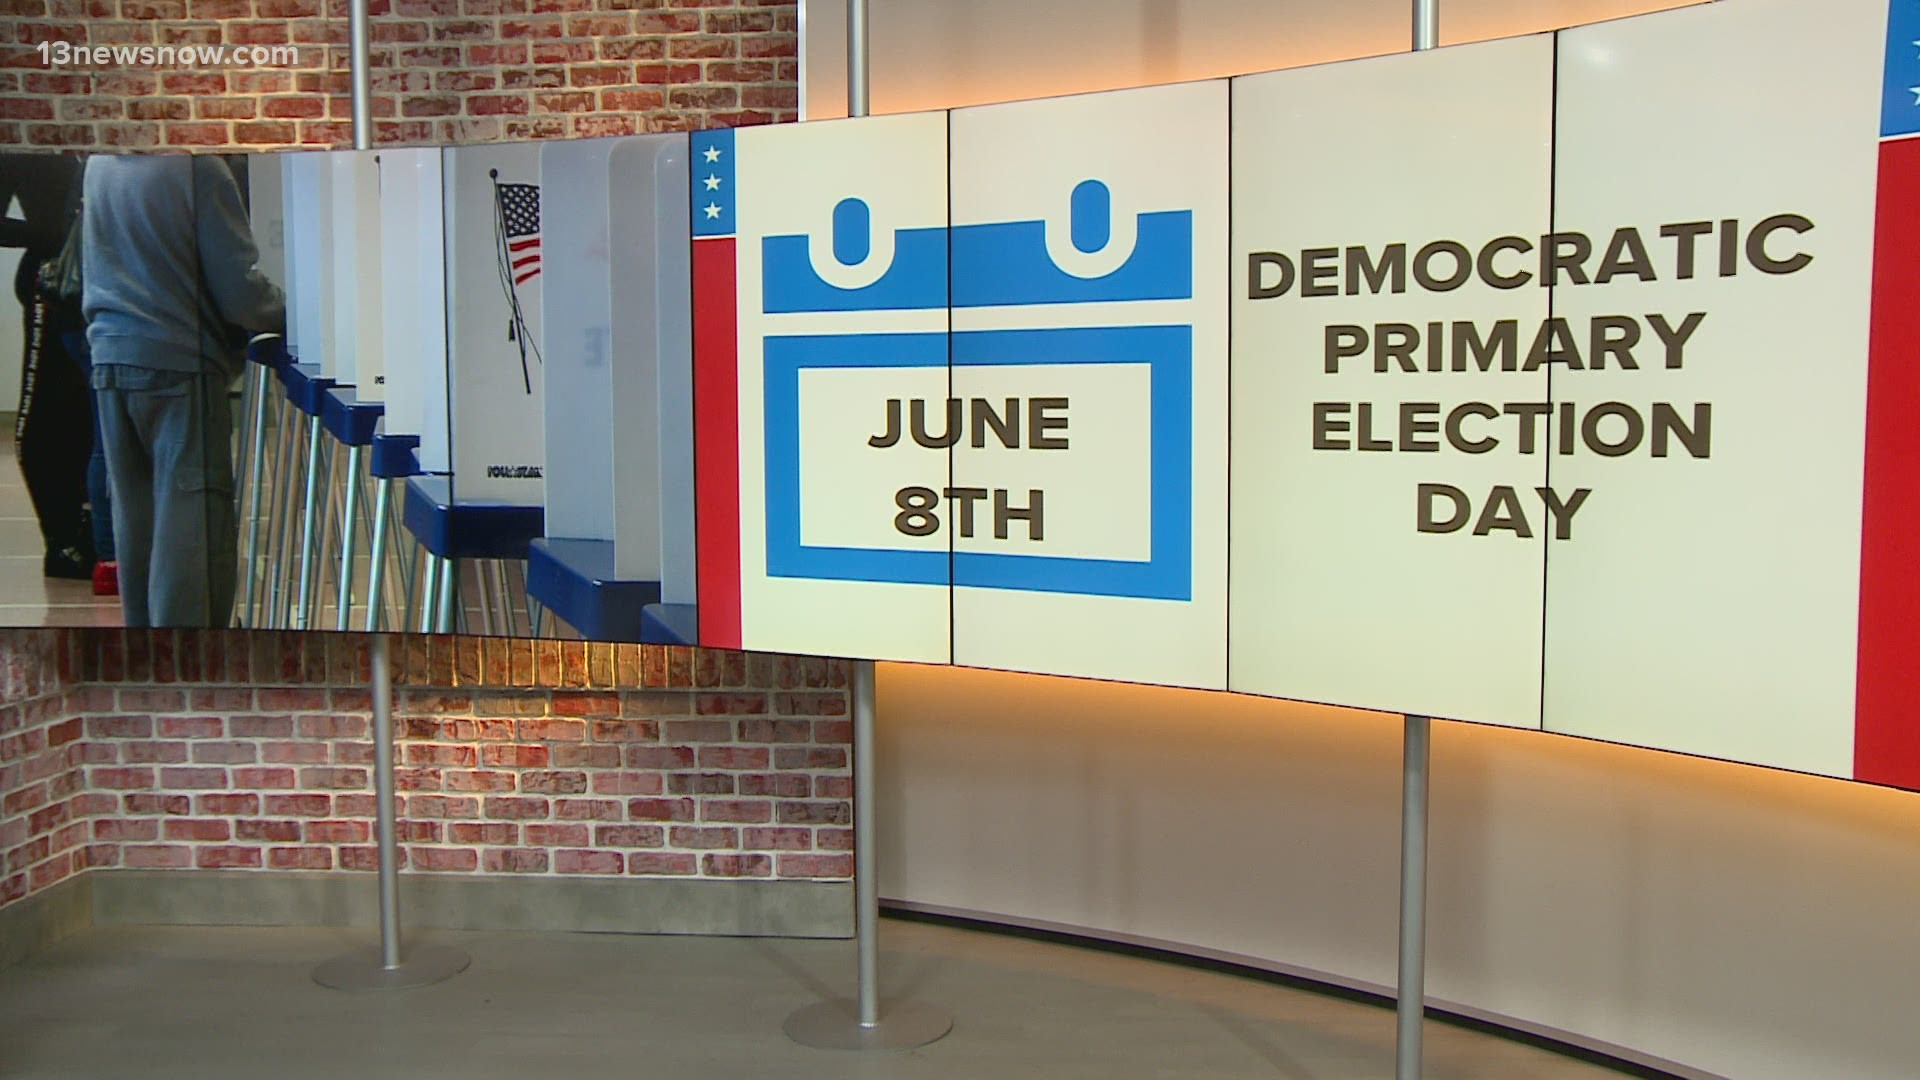 On June 8, this Democratic primary will pick the candidate for governor, lieutenant governor and attorney general.